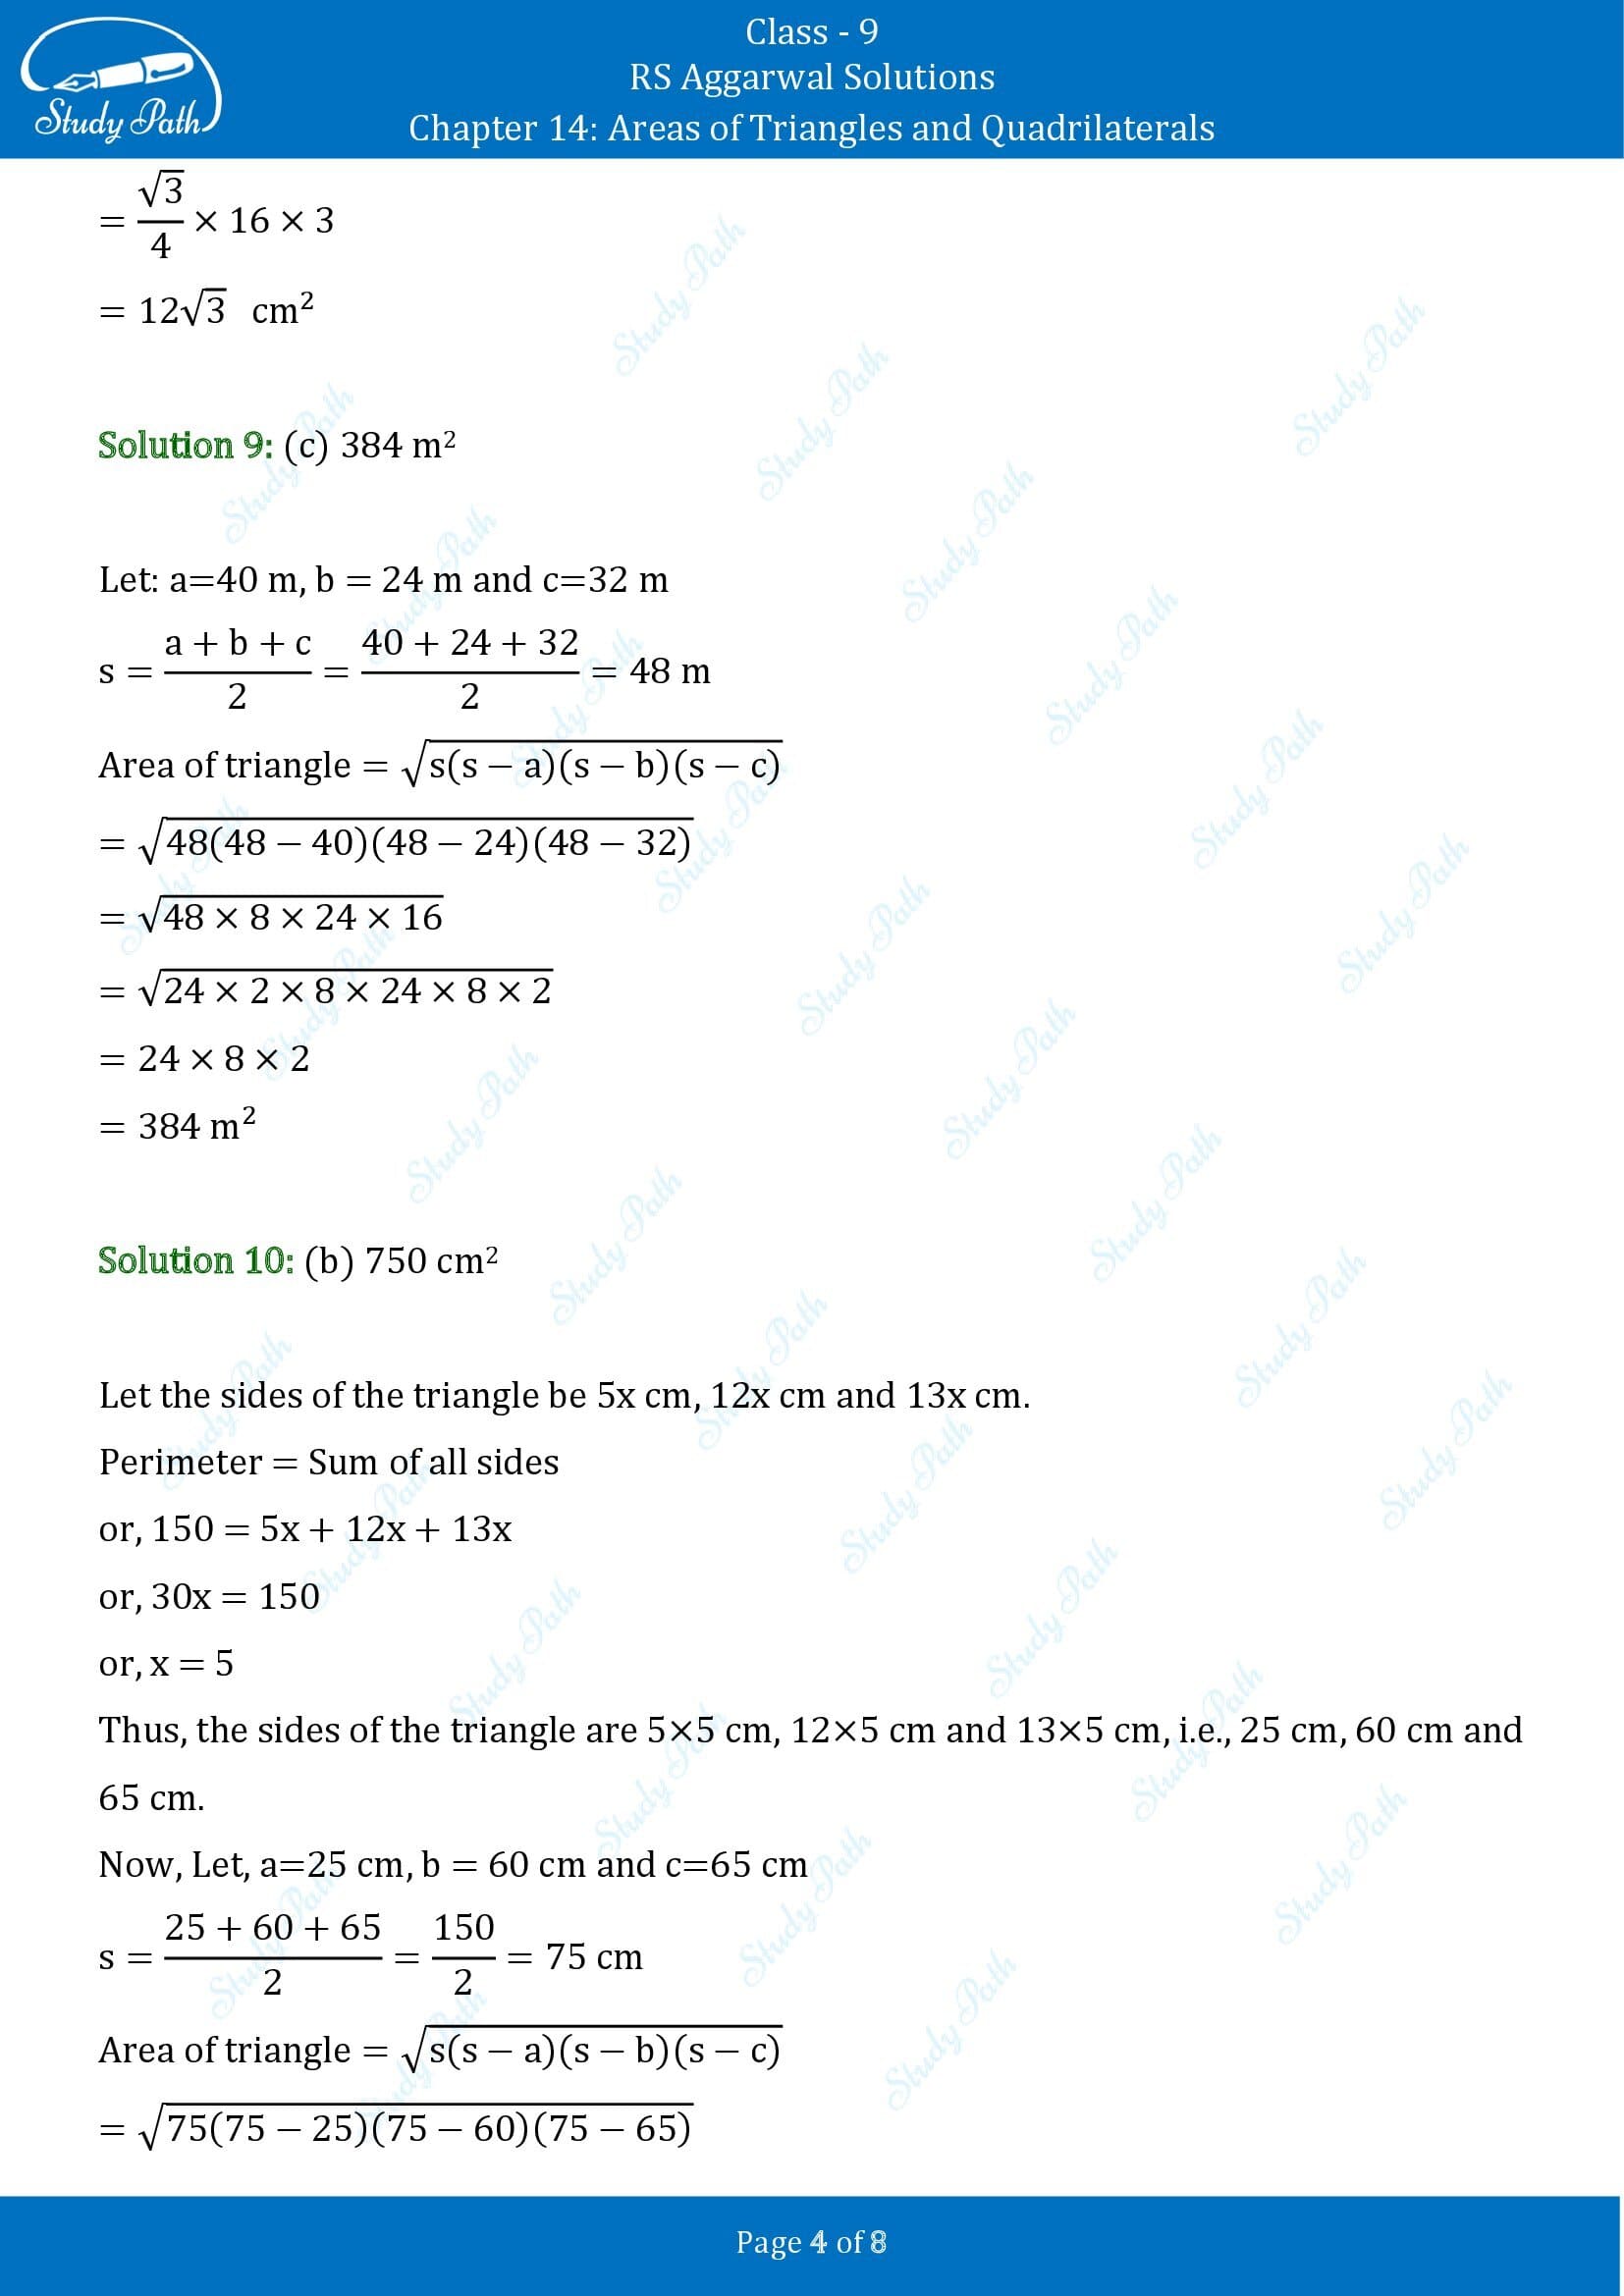 RS Aggarwal Solutions Class 9 Chapter 14 Areas of Triangles and Quadrilaterals Multiple Choice Questions MCQs 00004